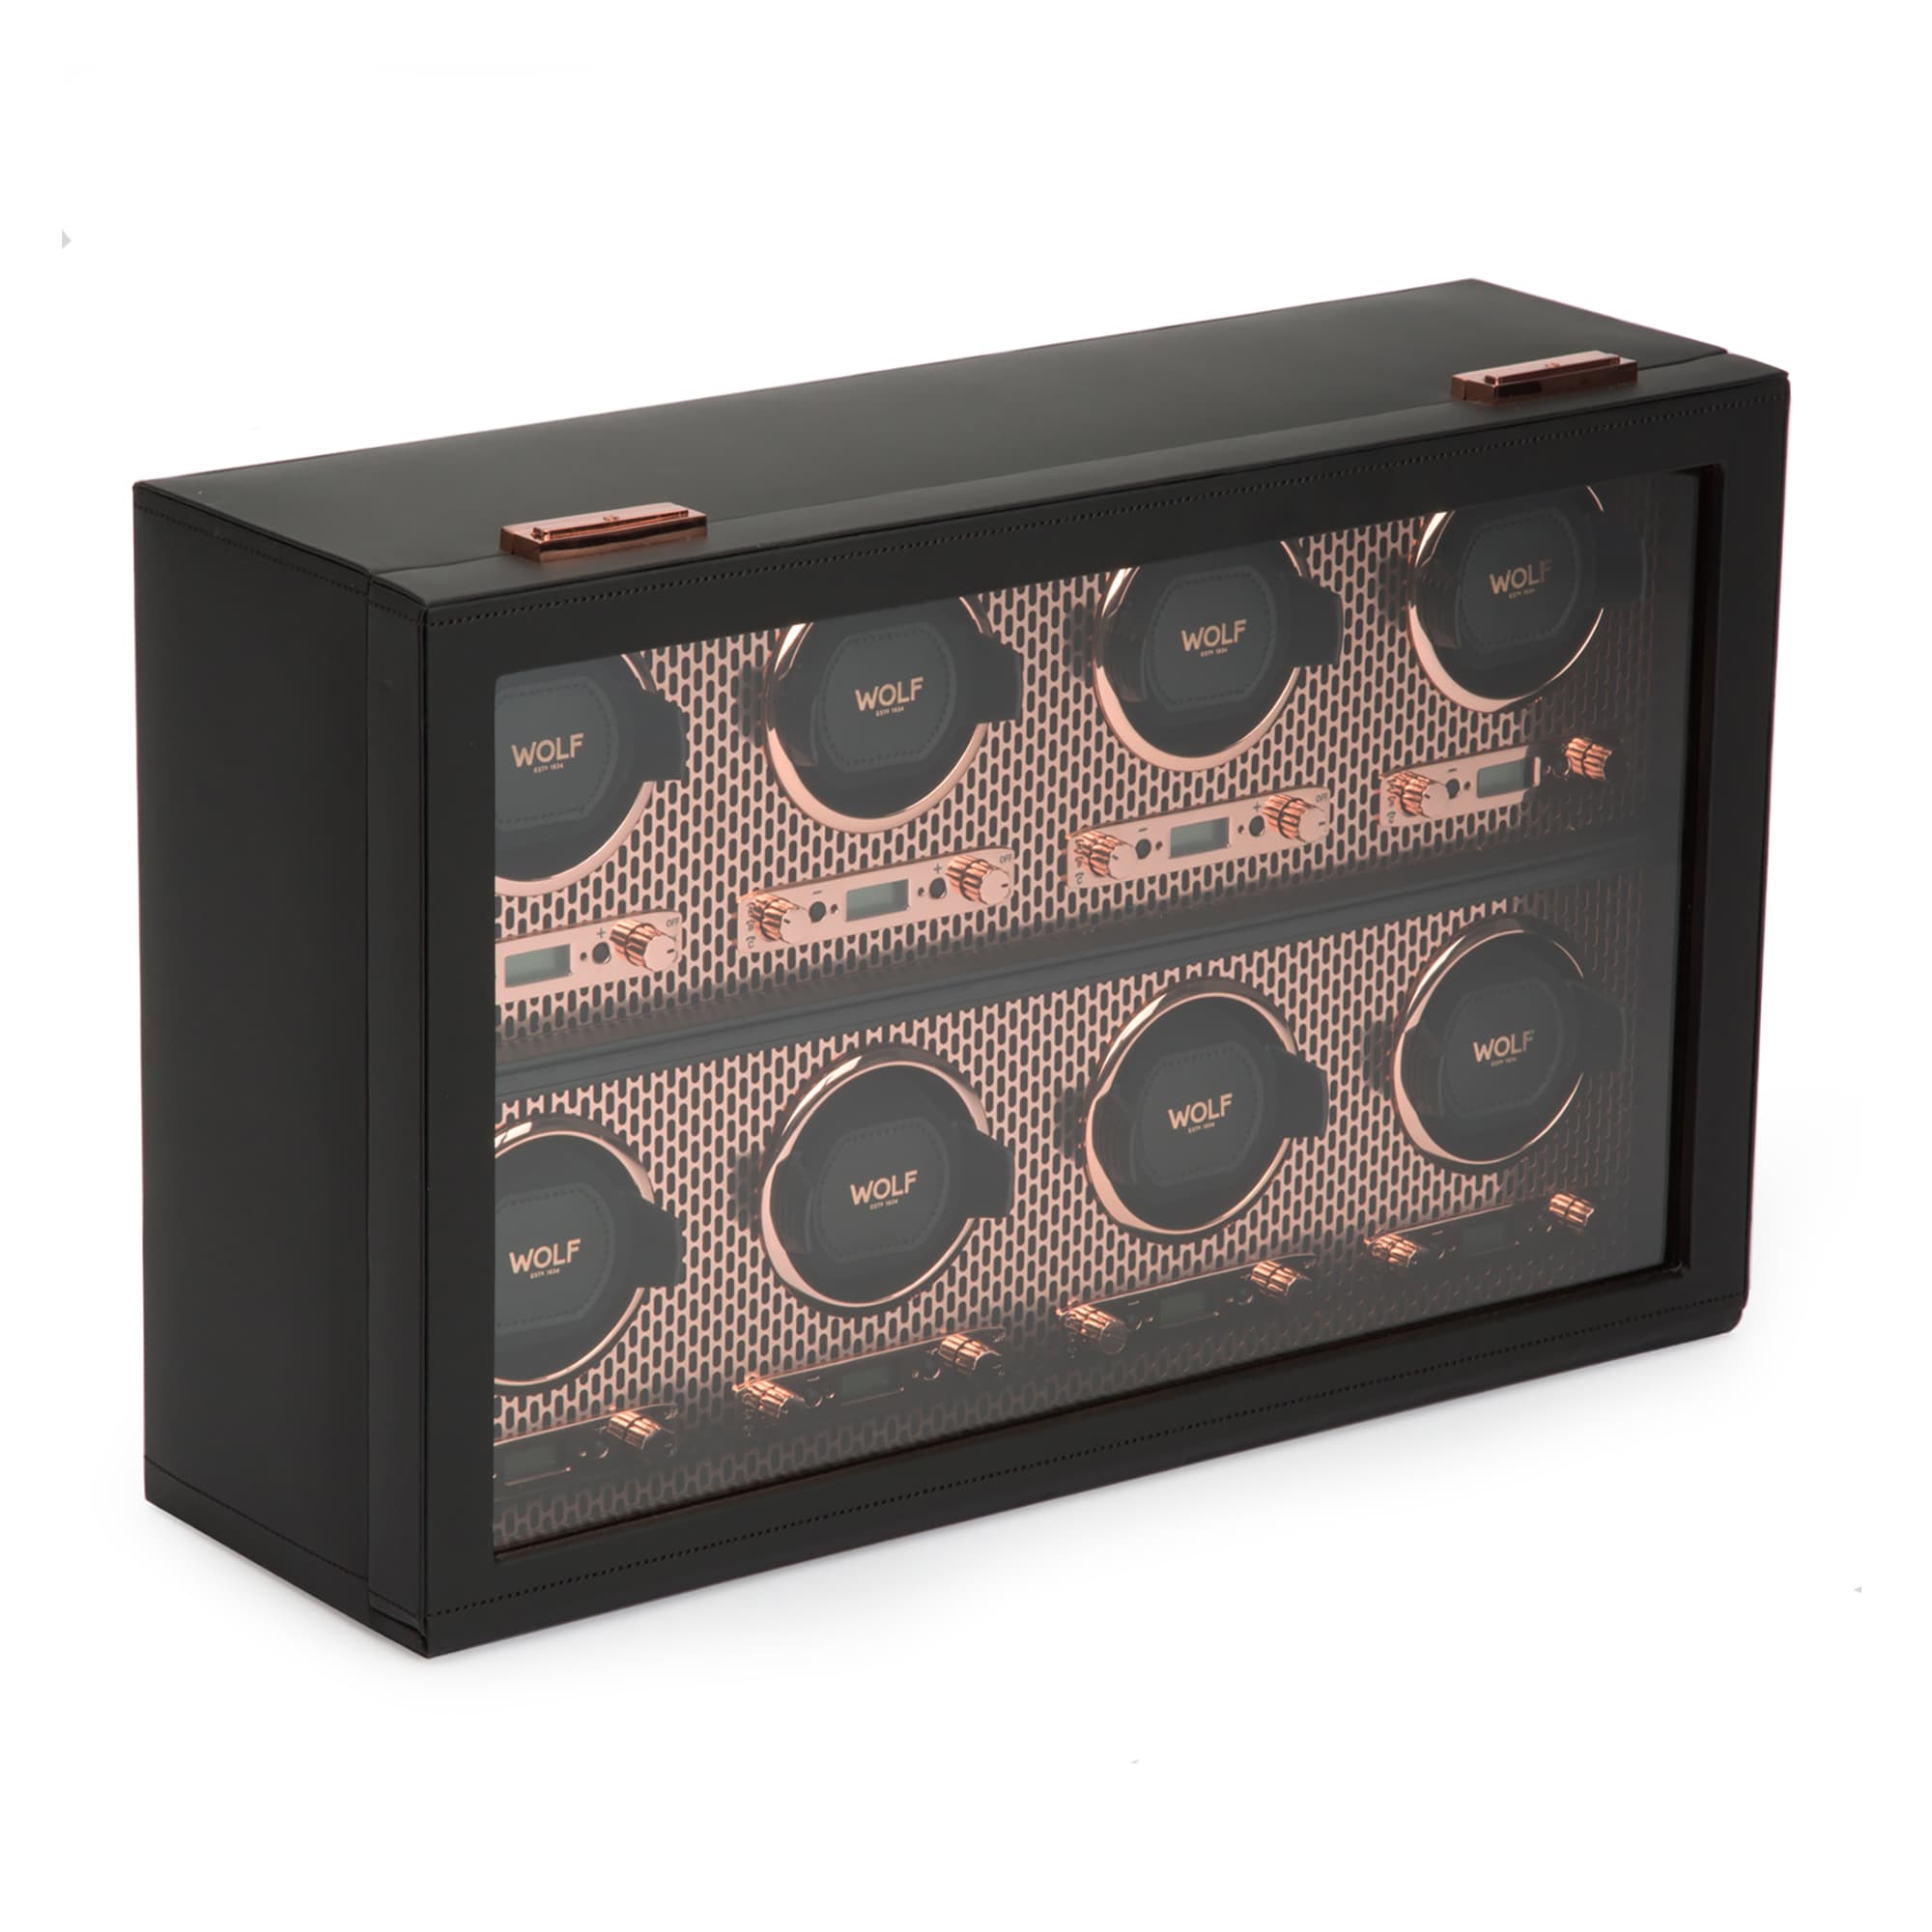 Wolf-Axis-8PC-Watch-Winder-Copper-469716-1